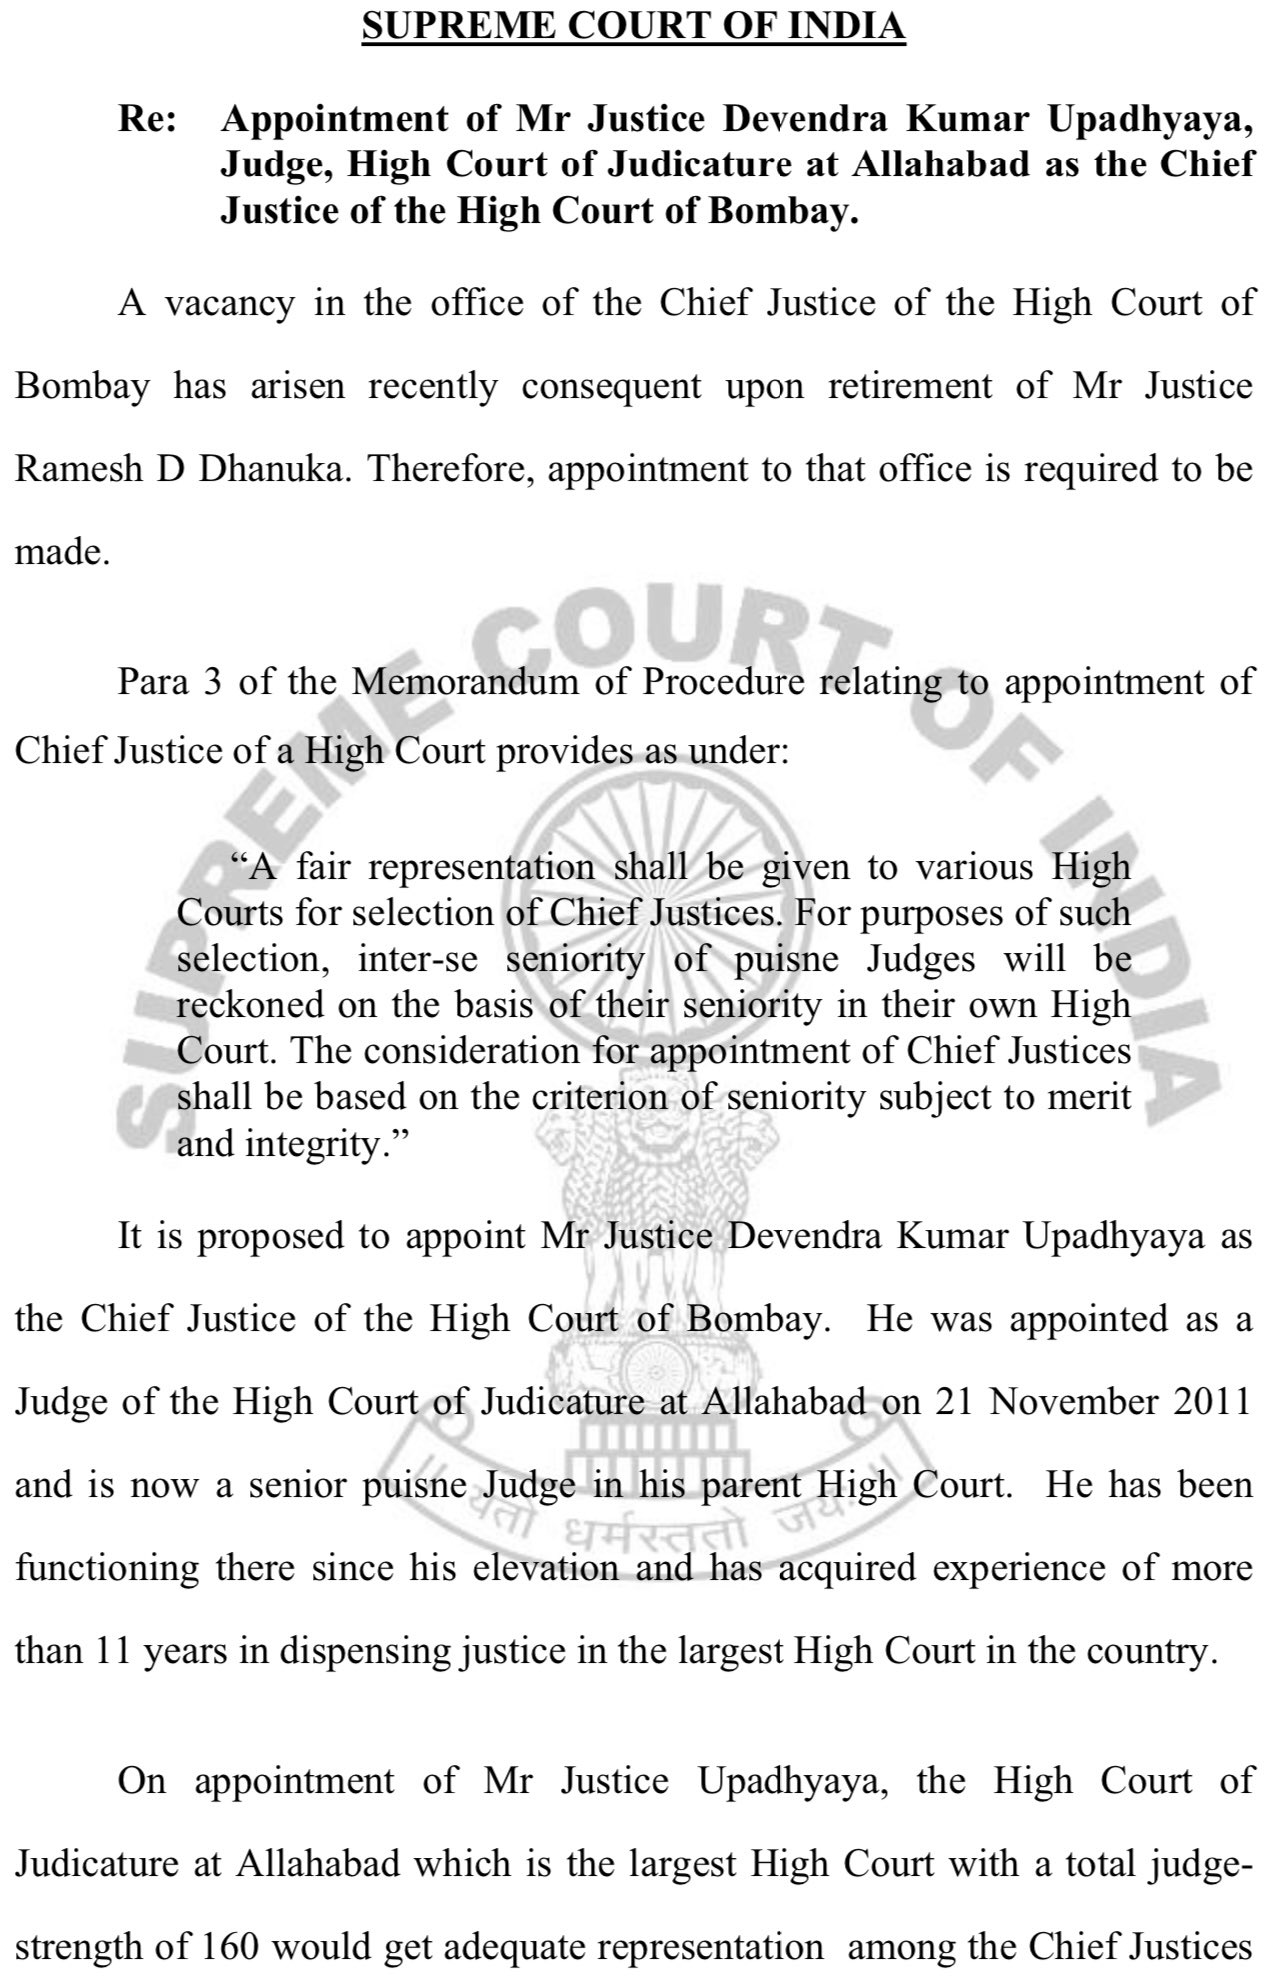 The Supreme Court of India's recommendation letter to appoint Devendra Kumar Upadhyaya as the Chief Justice of Bombay High Court